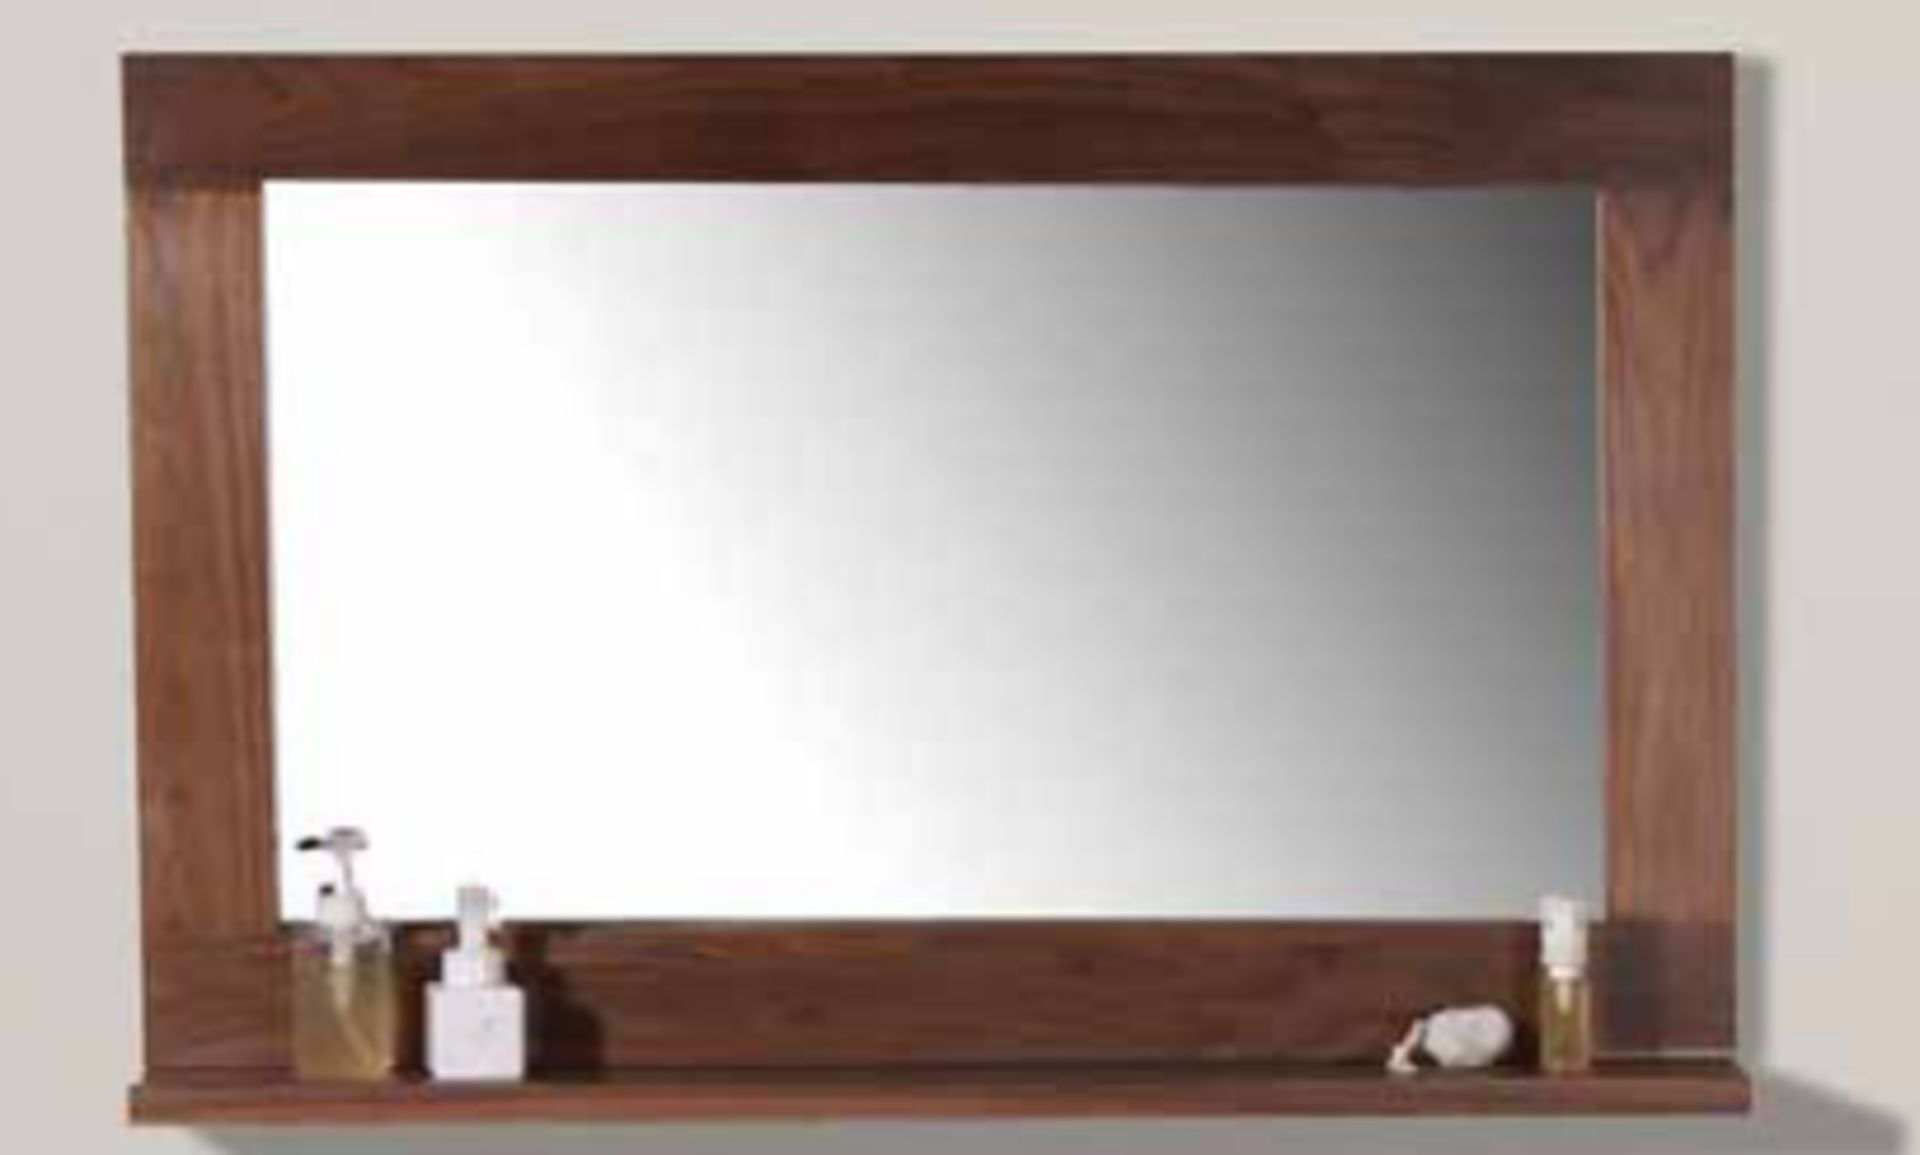 1 x Stonearth Bathroom Wall Mirror With Solid Walnut Frame and Bevelled Glass Mirror - Size: Large - Image 11 of 11